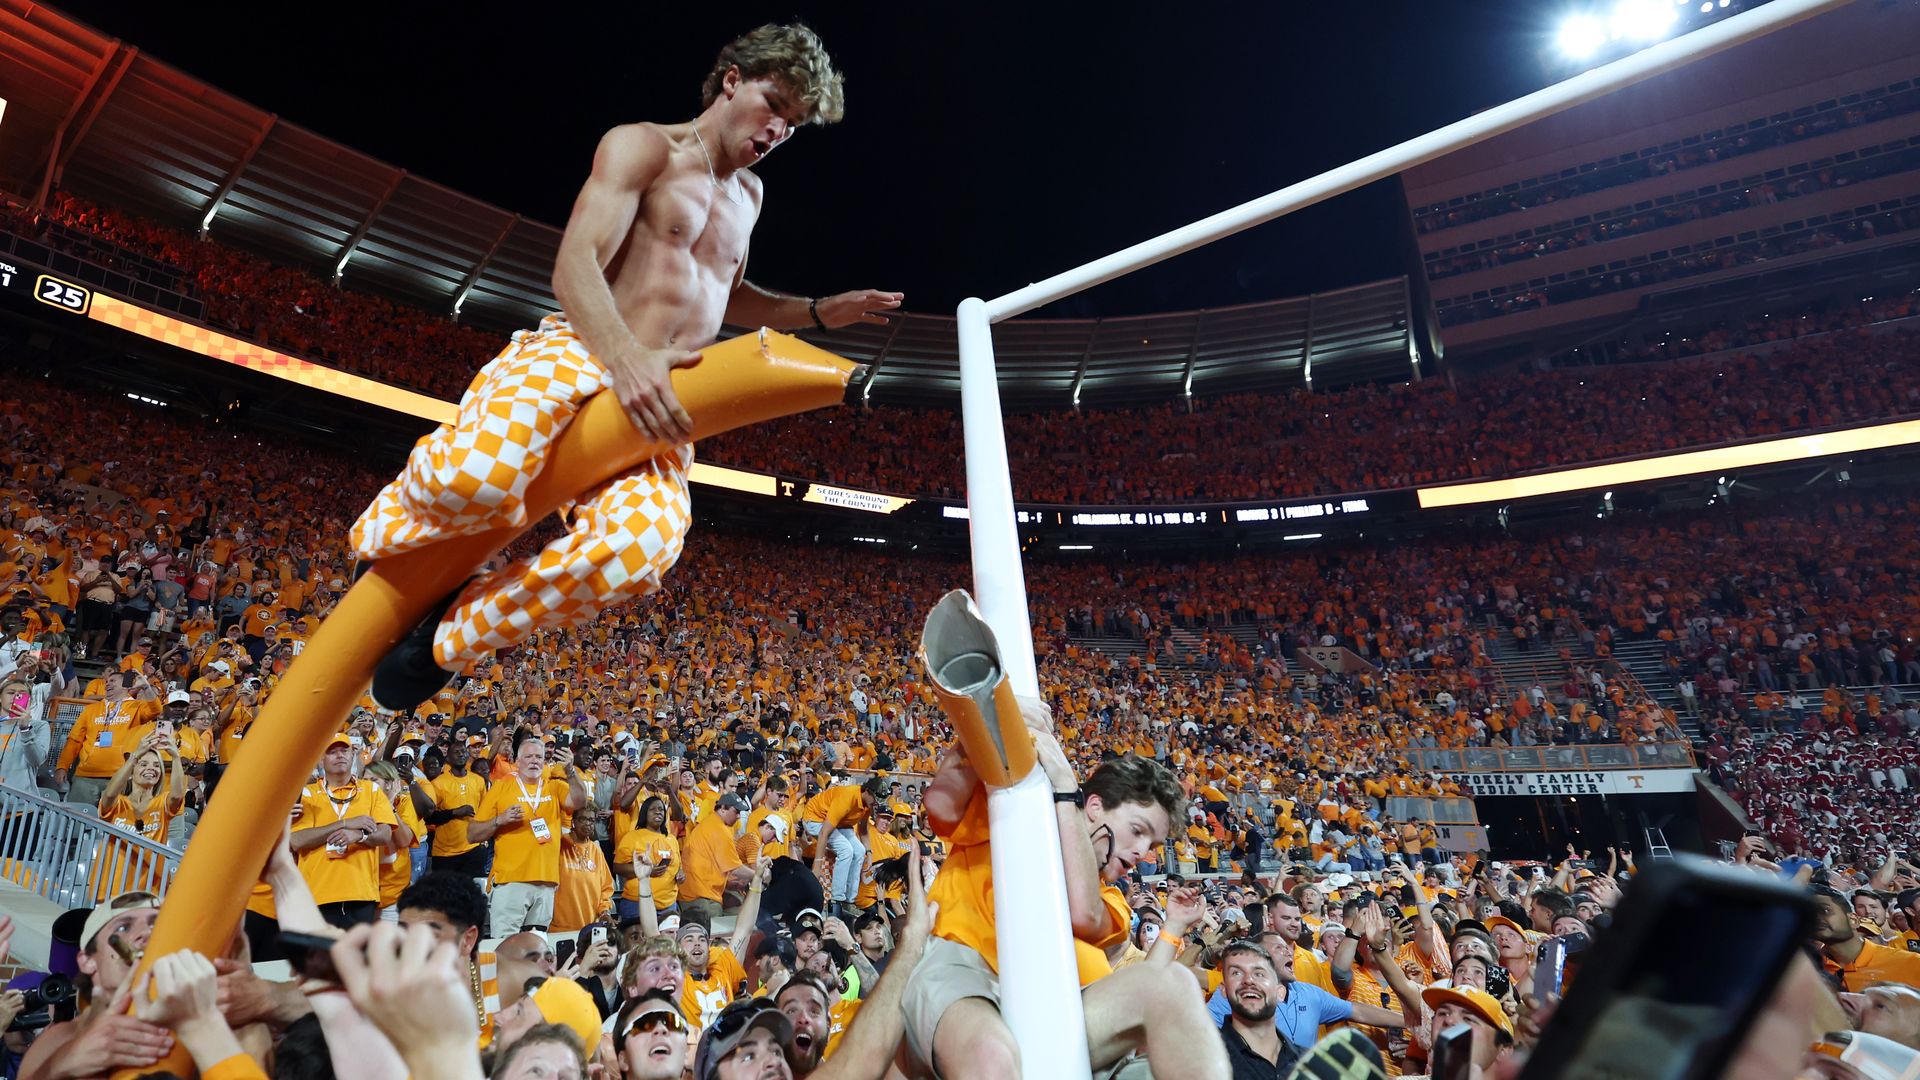 Tennessee Volunteers fans tearing down a goal post after their victor over the Alabama Crimson Tide at Neyland Stadium on Oct. 15.